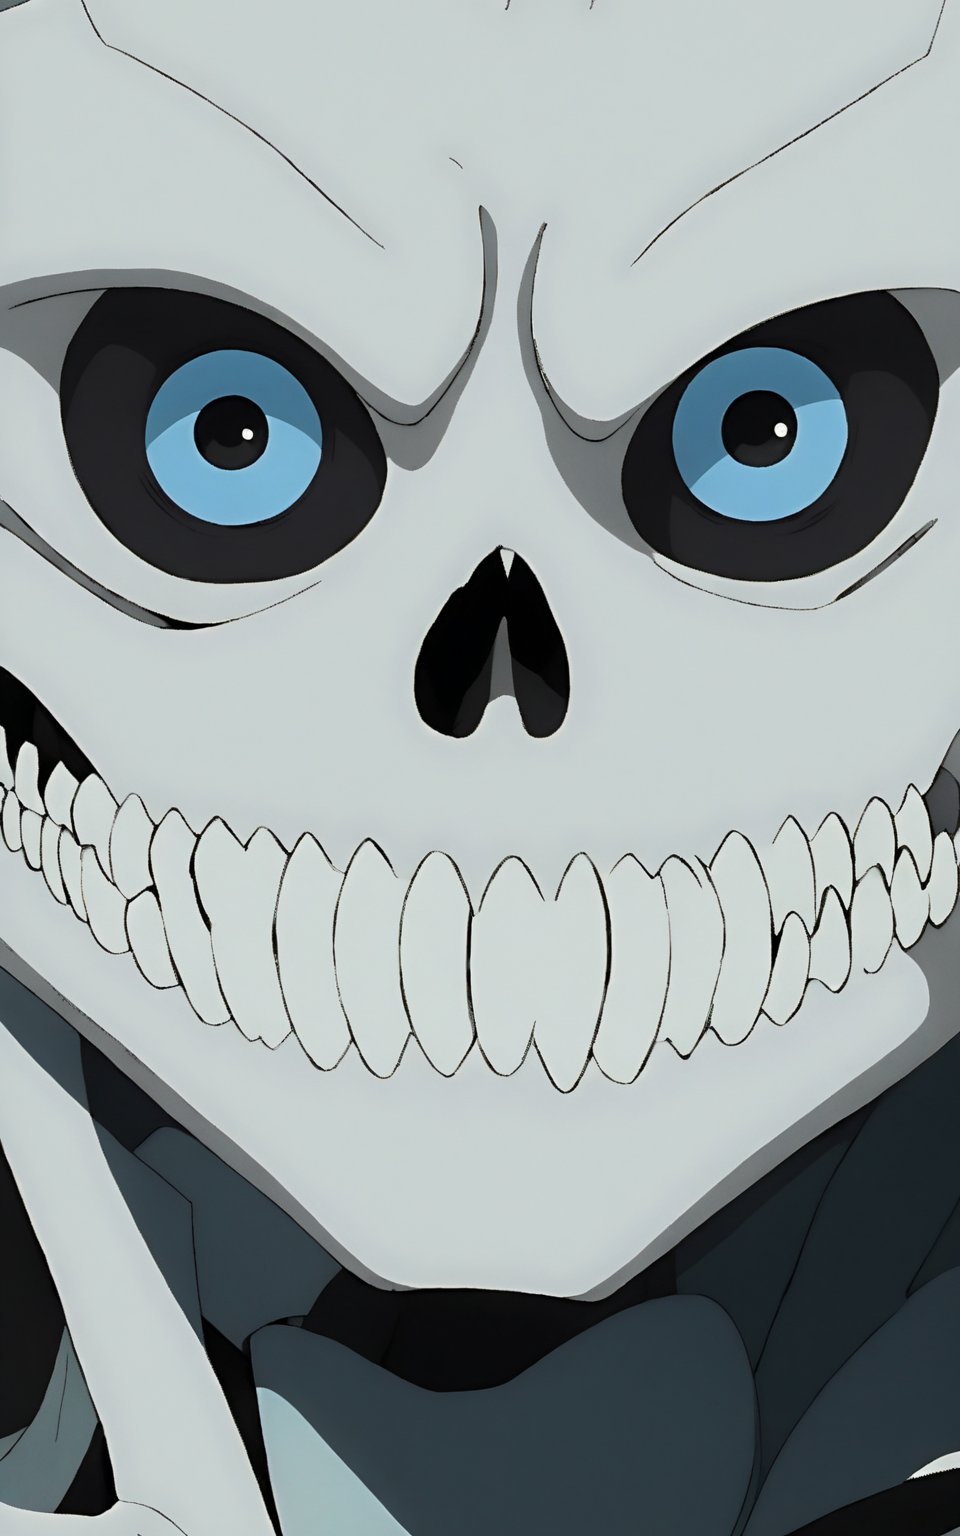 Kaiju No. 8, kafka hibino kaiju form, a close up of the face of a skeleton with blue eyes and an evil look on it's face